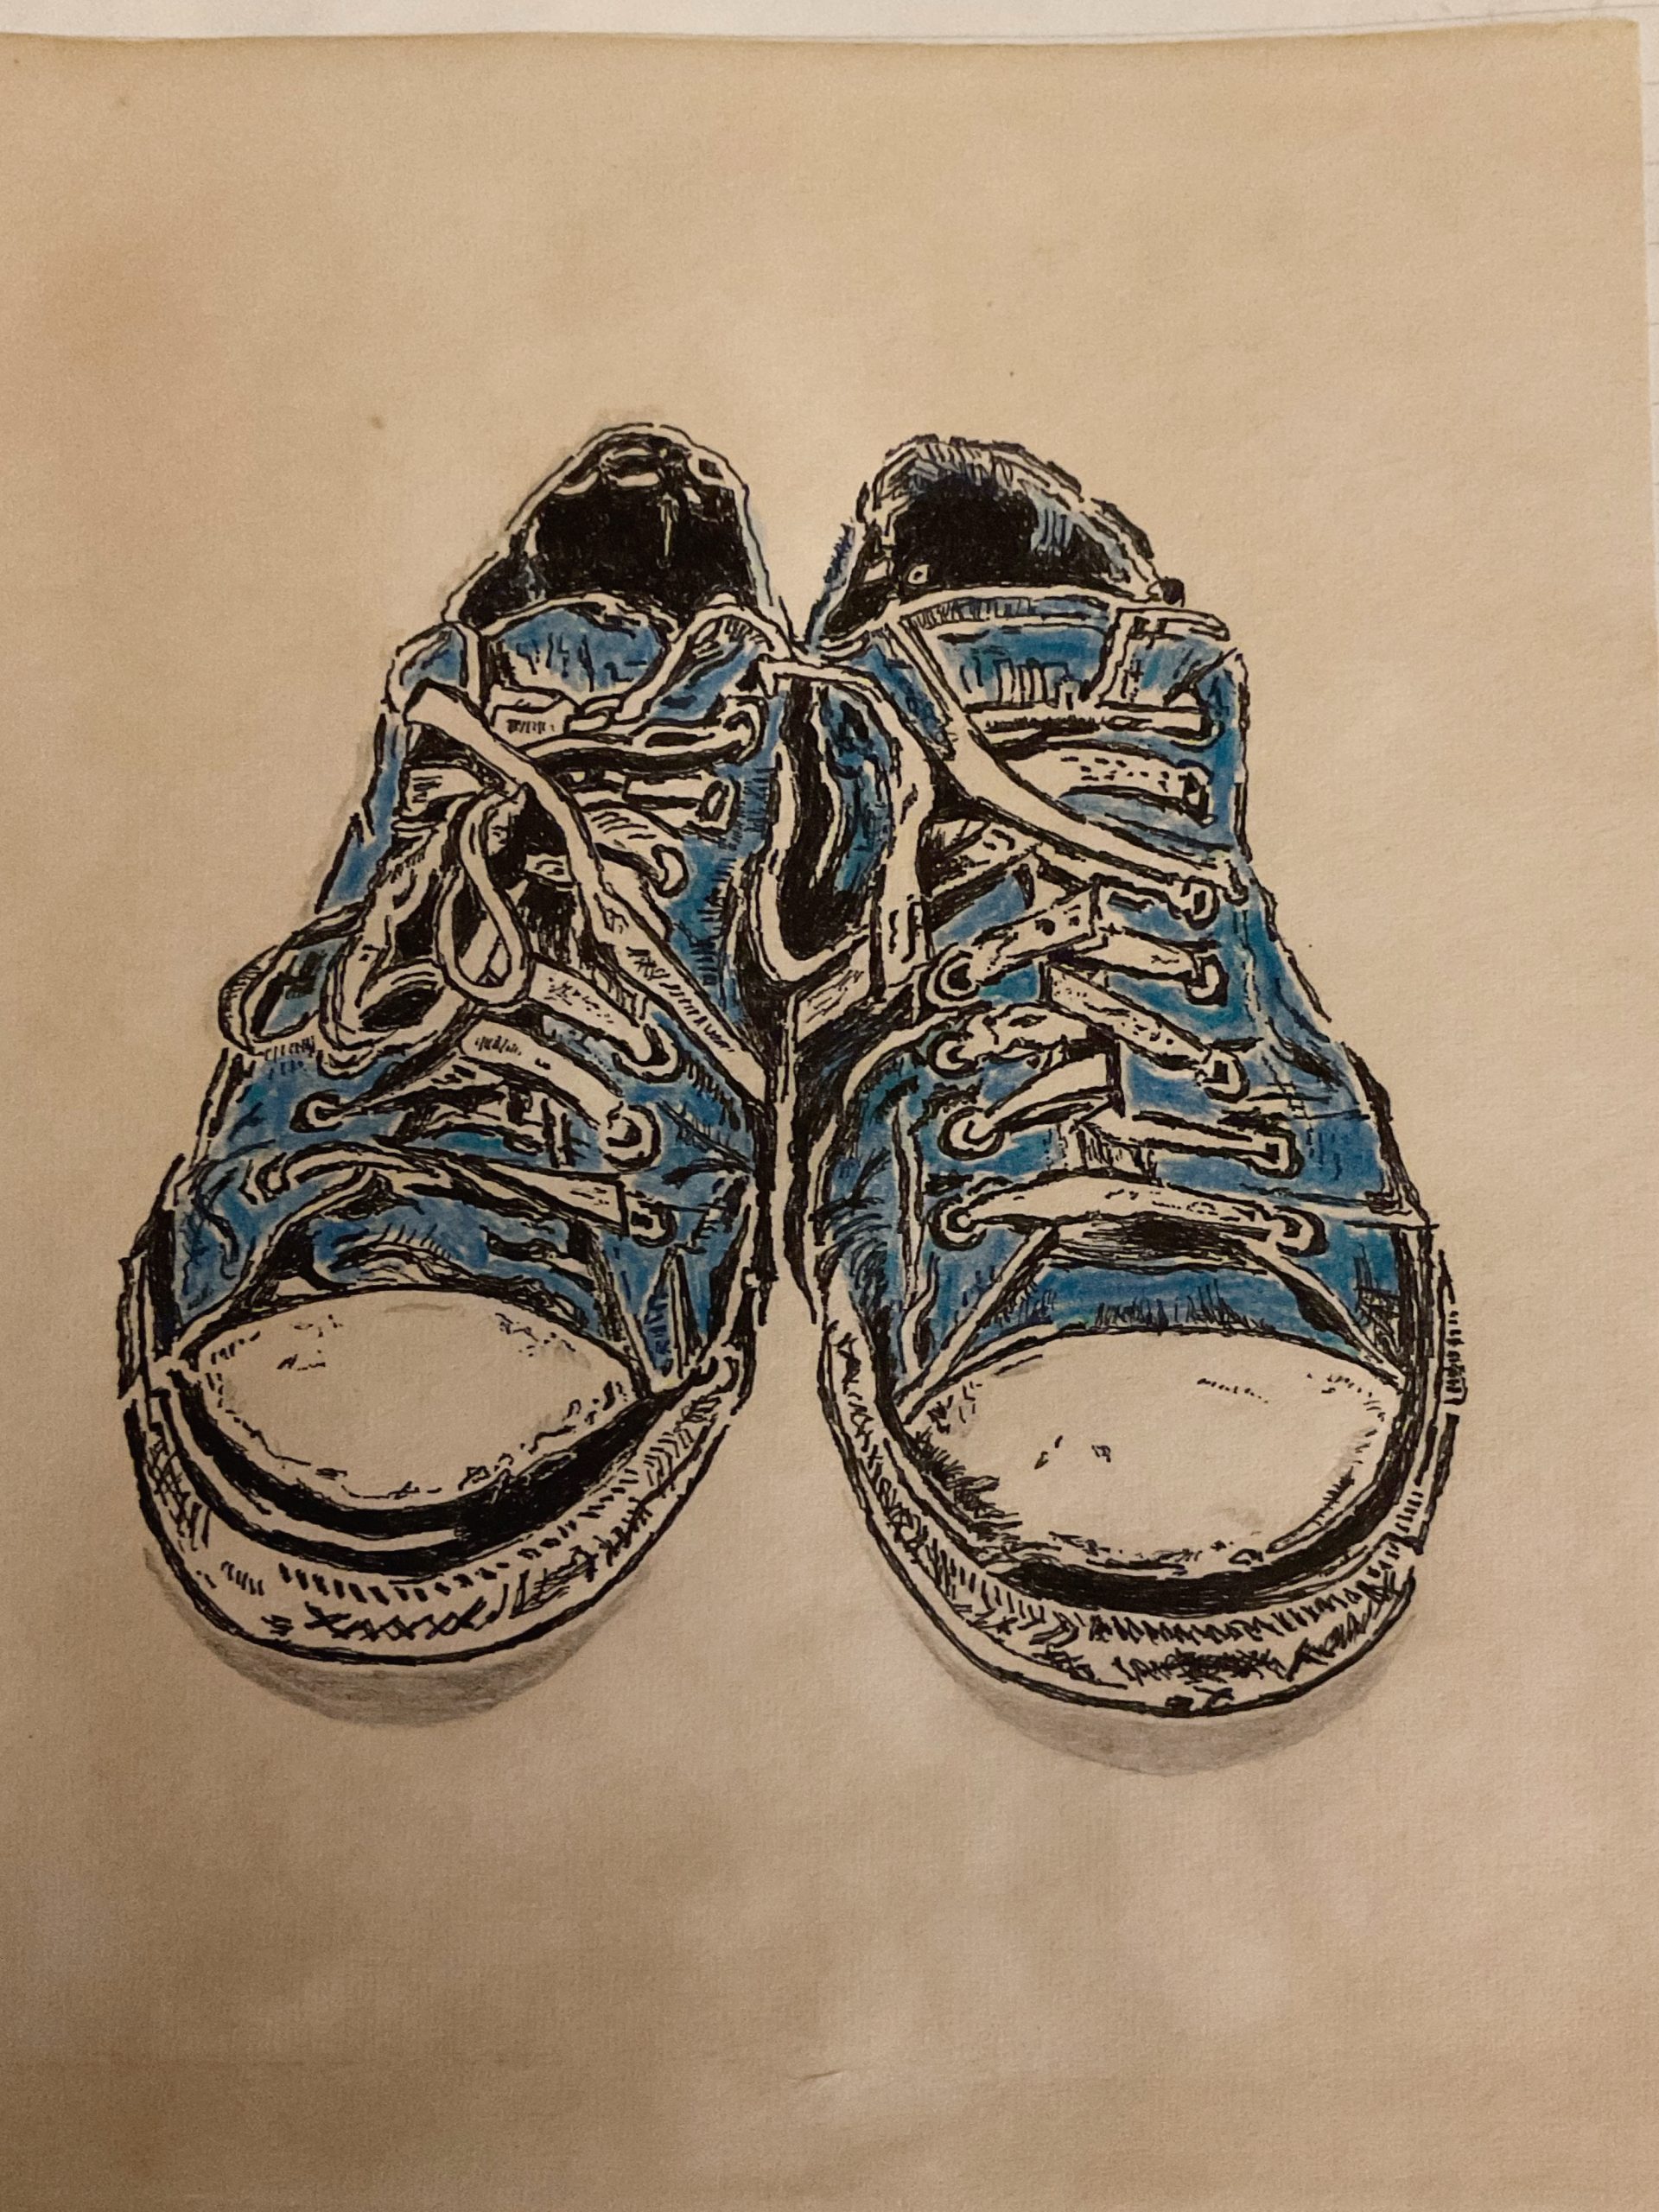 shoes sketch / still working